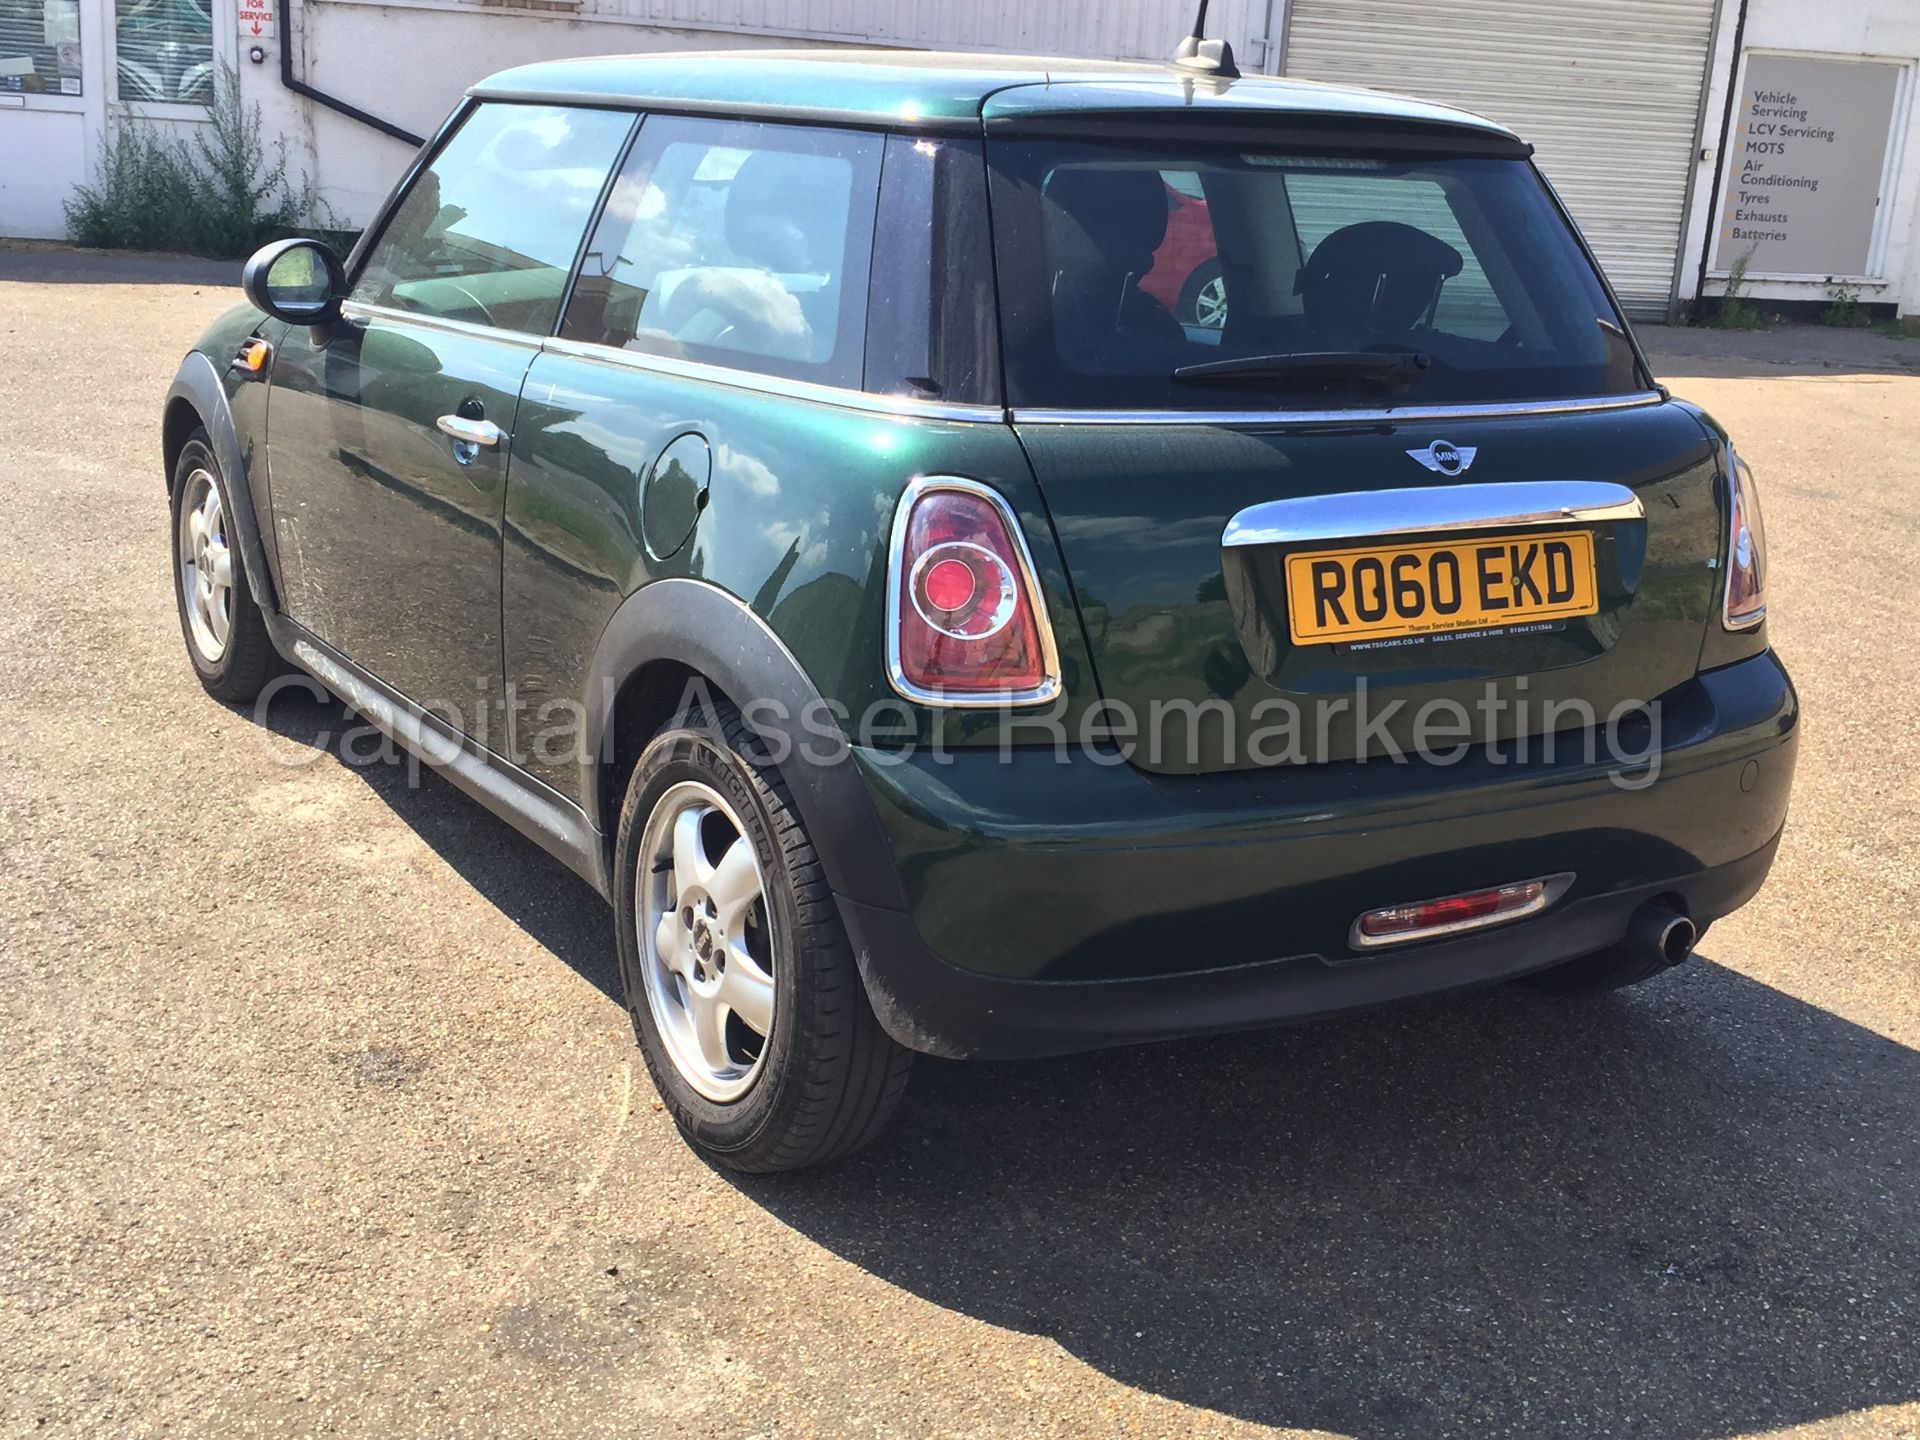 (ON SALE) MINI 'ONE EDITION' (2011 MODEL) '3 DOOR HATCHBACK' '1.6 PETROL - 6 SPEED - AIR CON' - Image 6 of 21